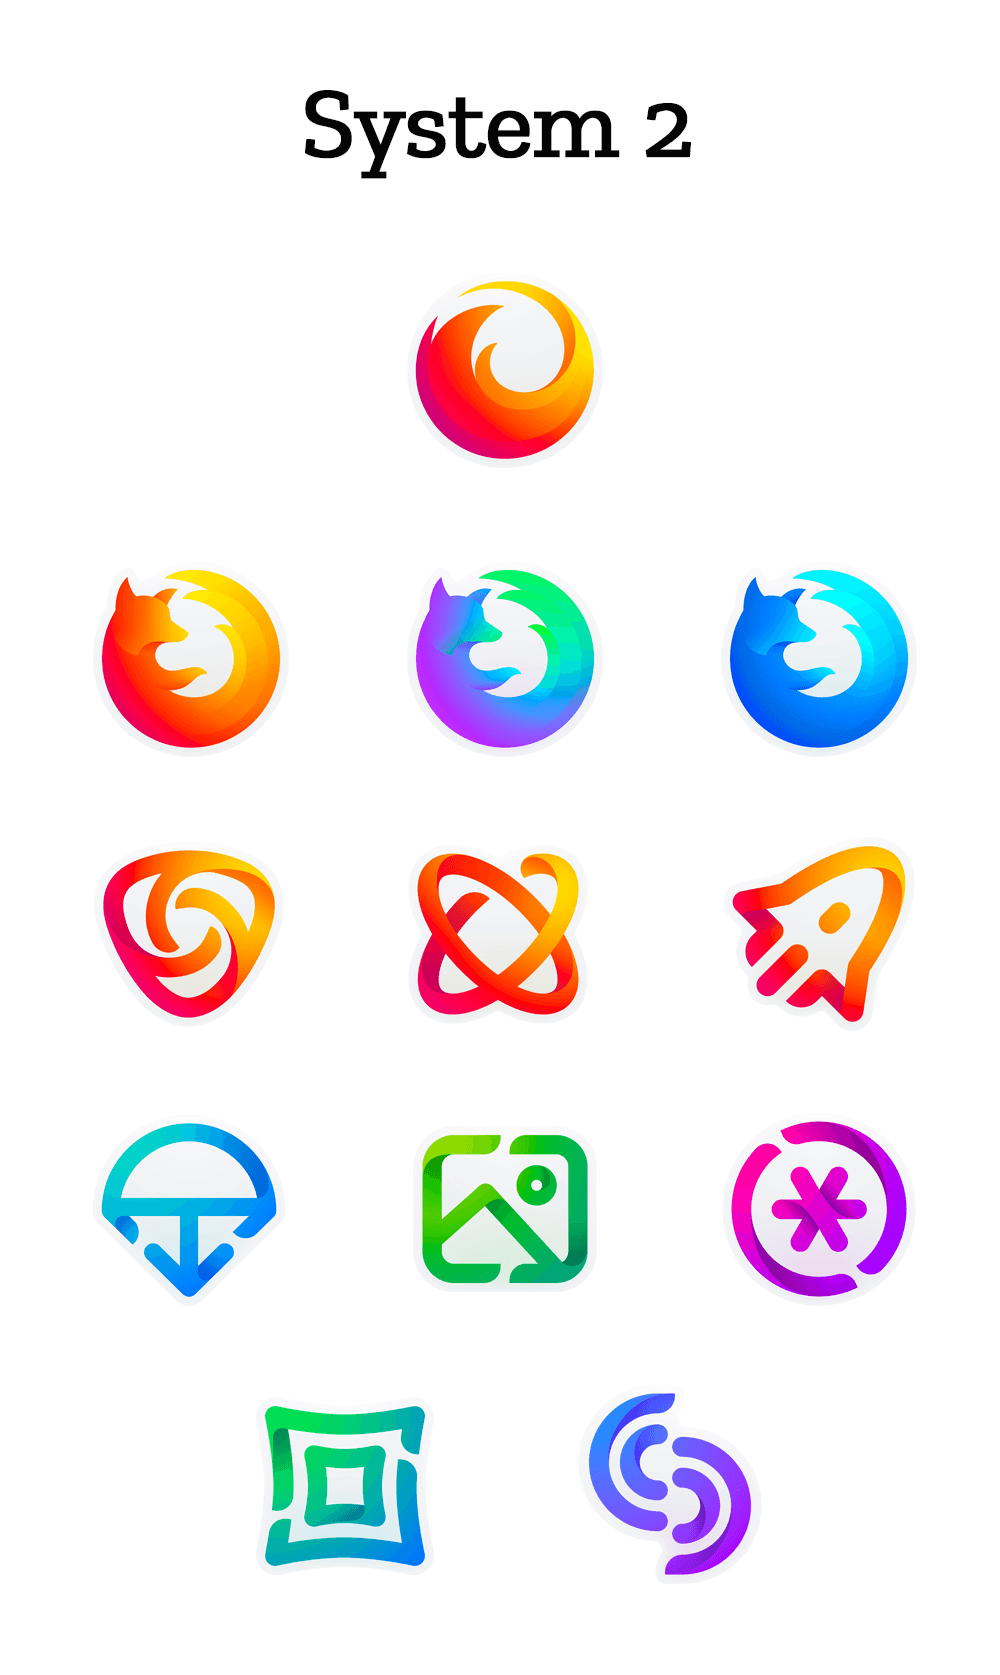 Mozilla Firefox Old Logo - Firefox is getting a new logo, and Mozilla wants to hear what users